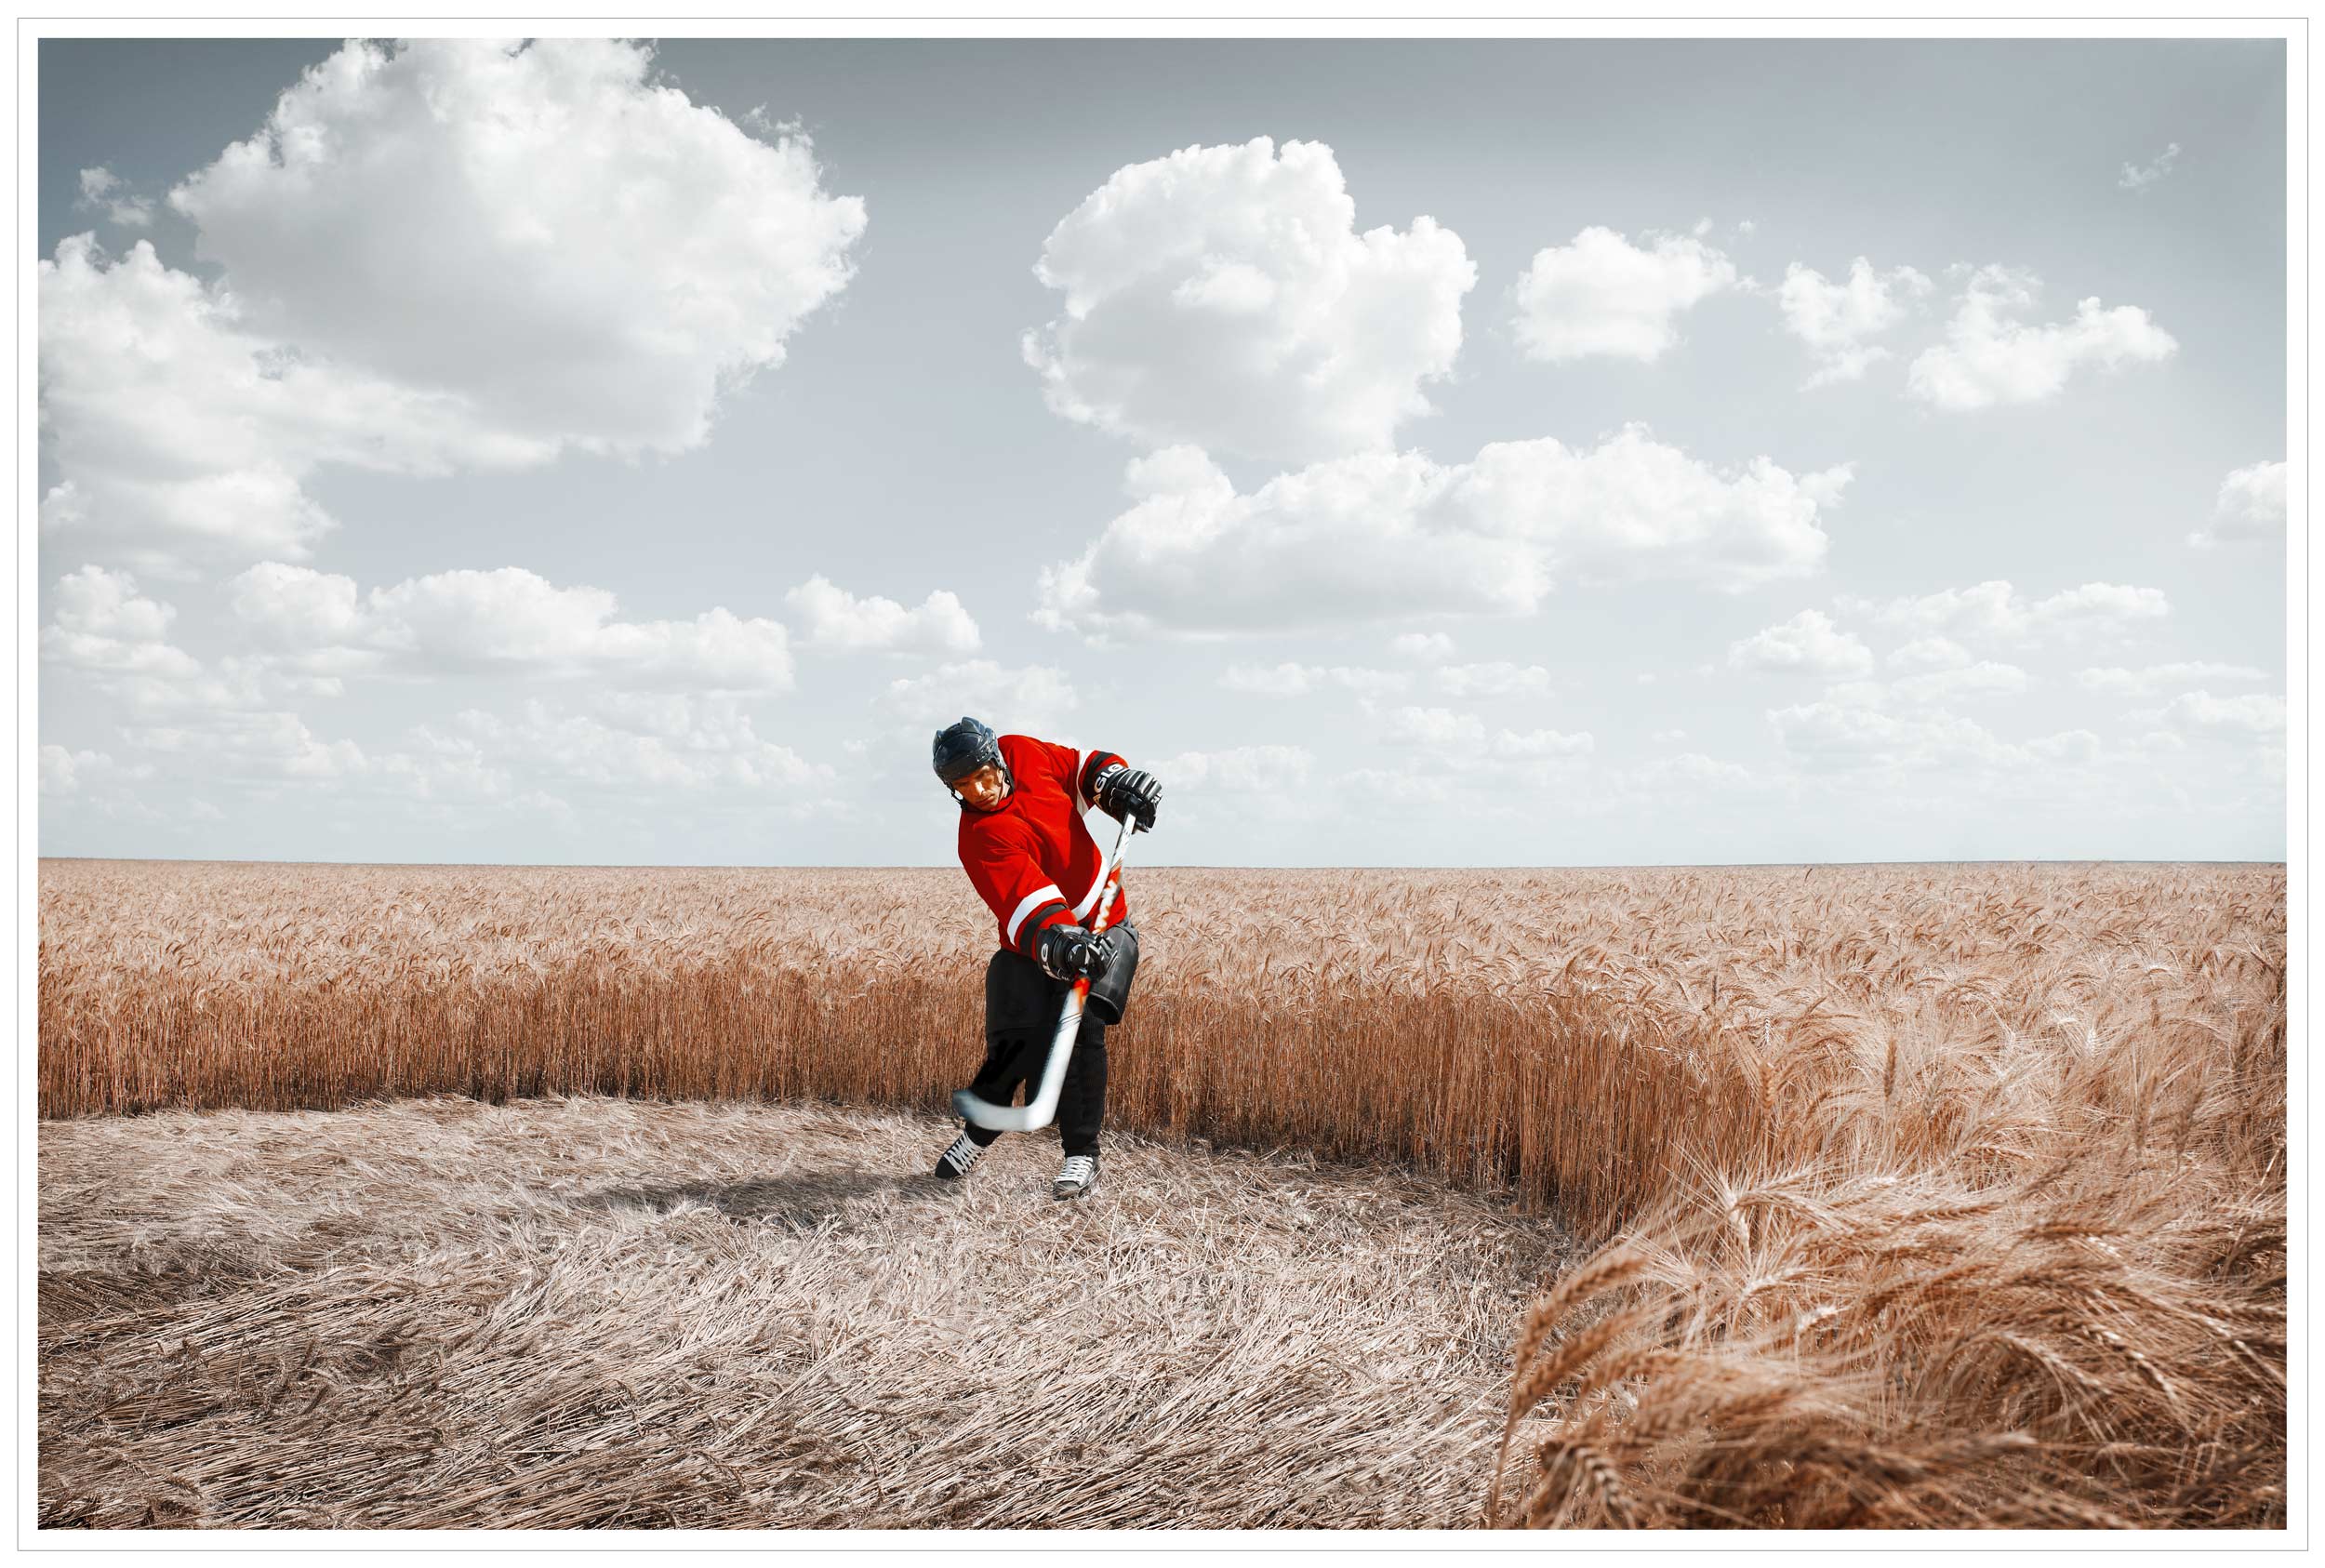 Man playing hockey in a wheat field - print campaign for CrossIron Mills